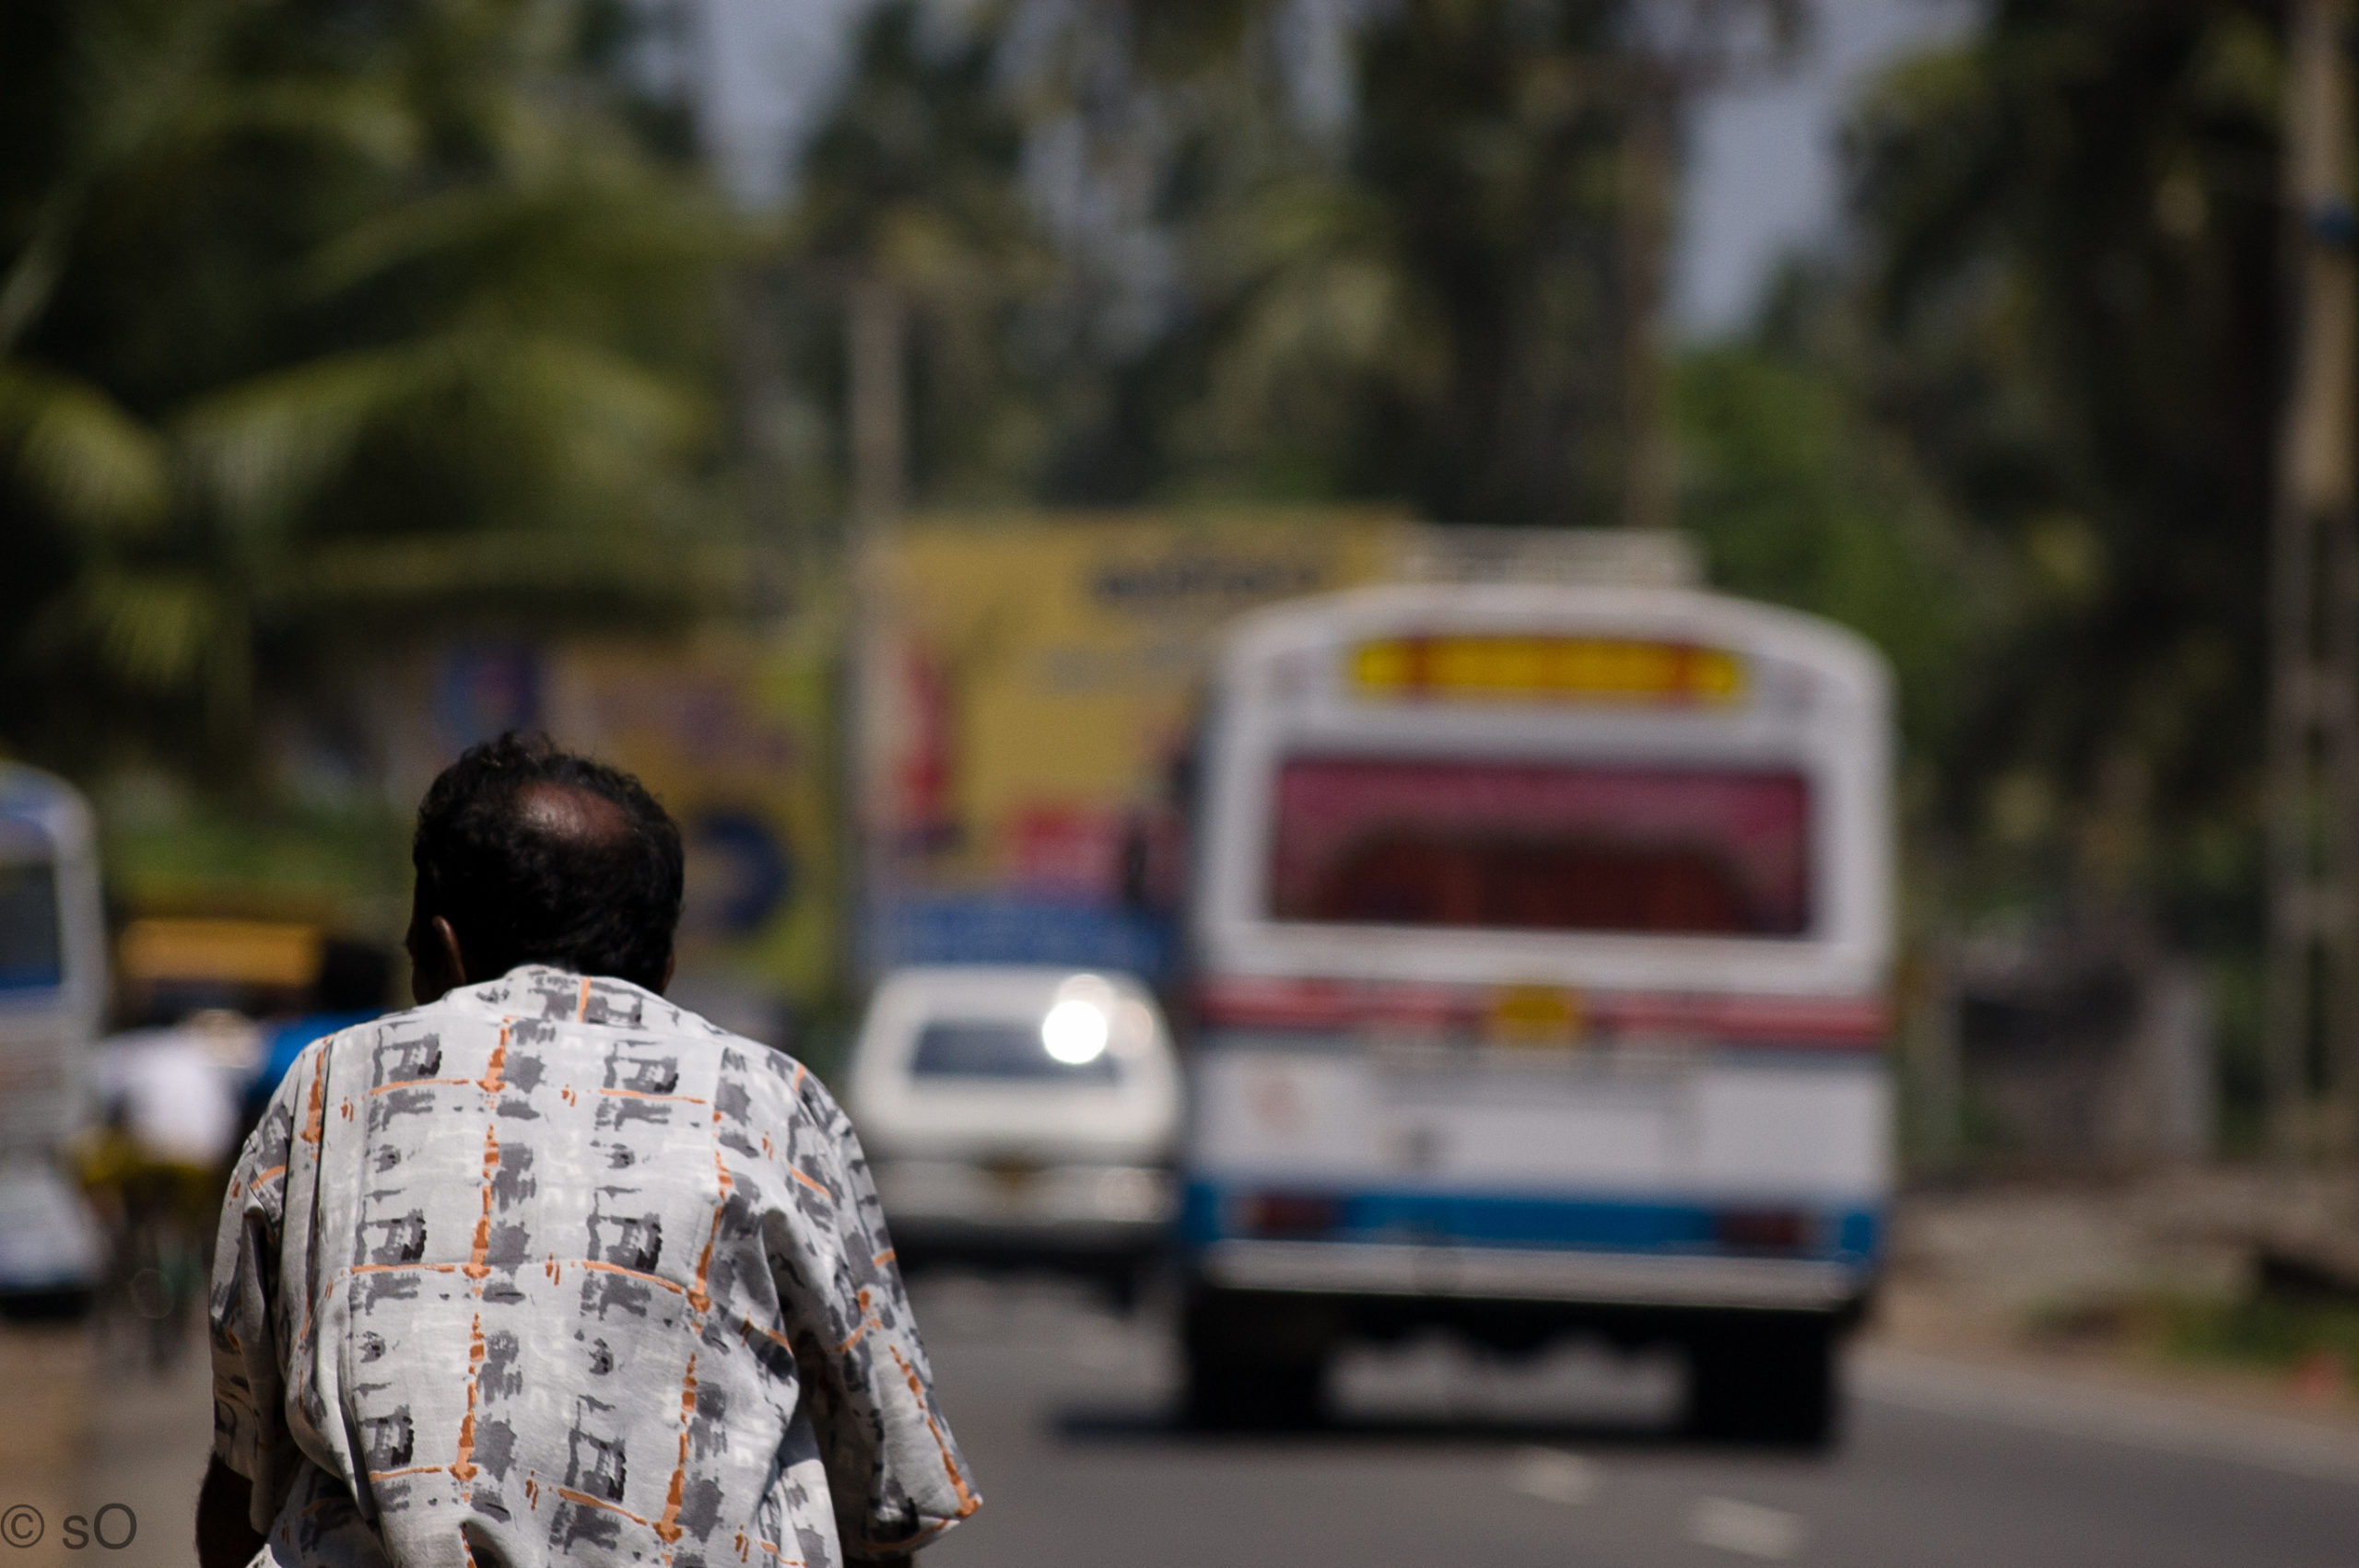 A man, either seated or riding a bicycle, is in focus. The photo is of his back as he looks at a bus on a Colombo, Sri Lanka road.